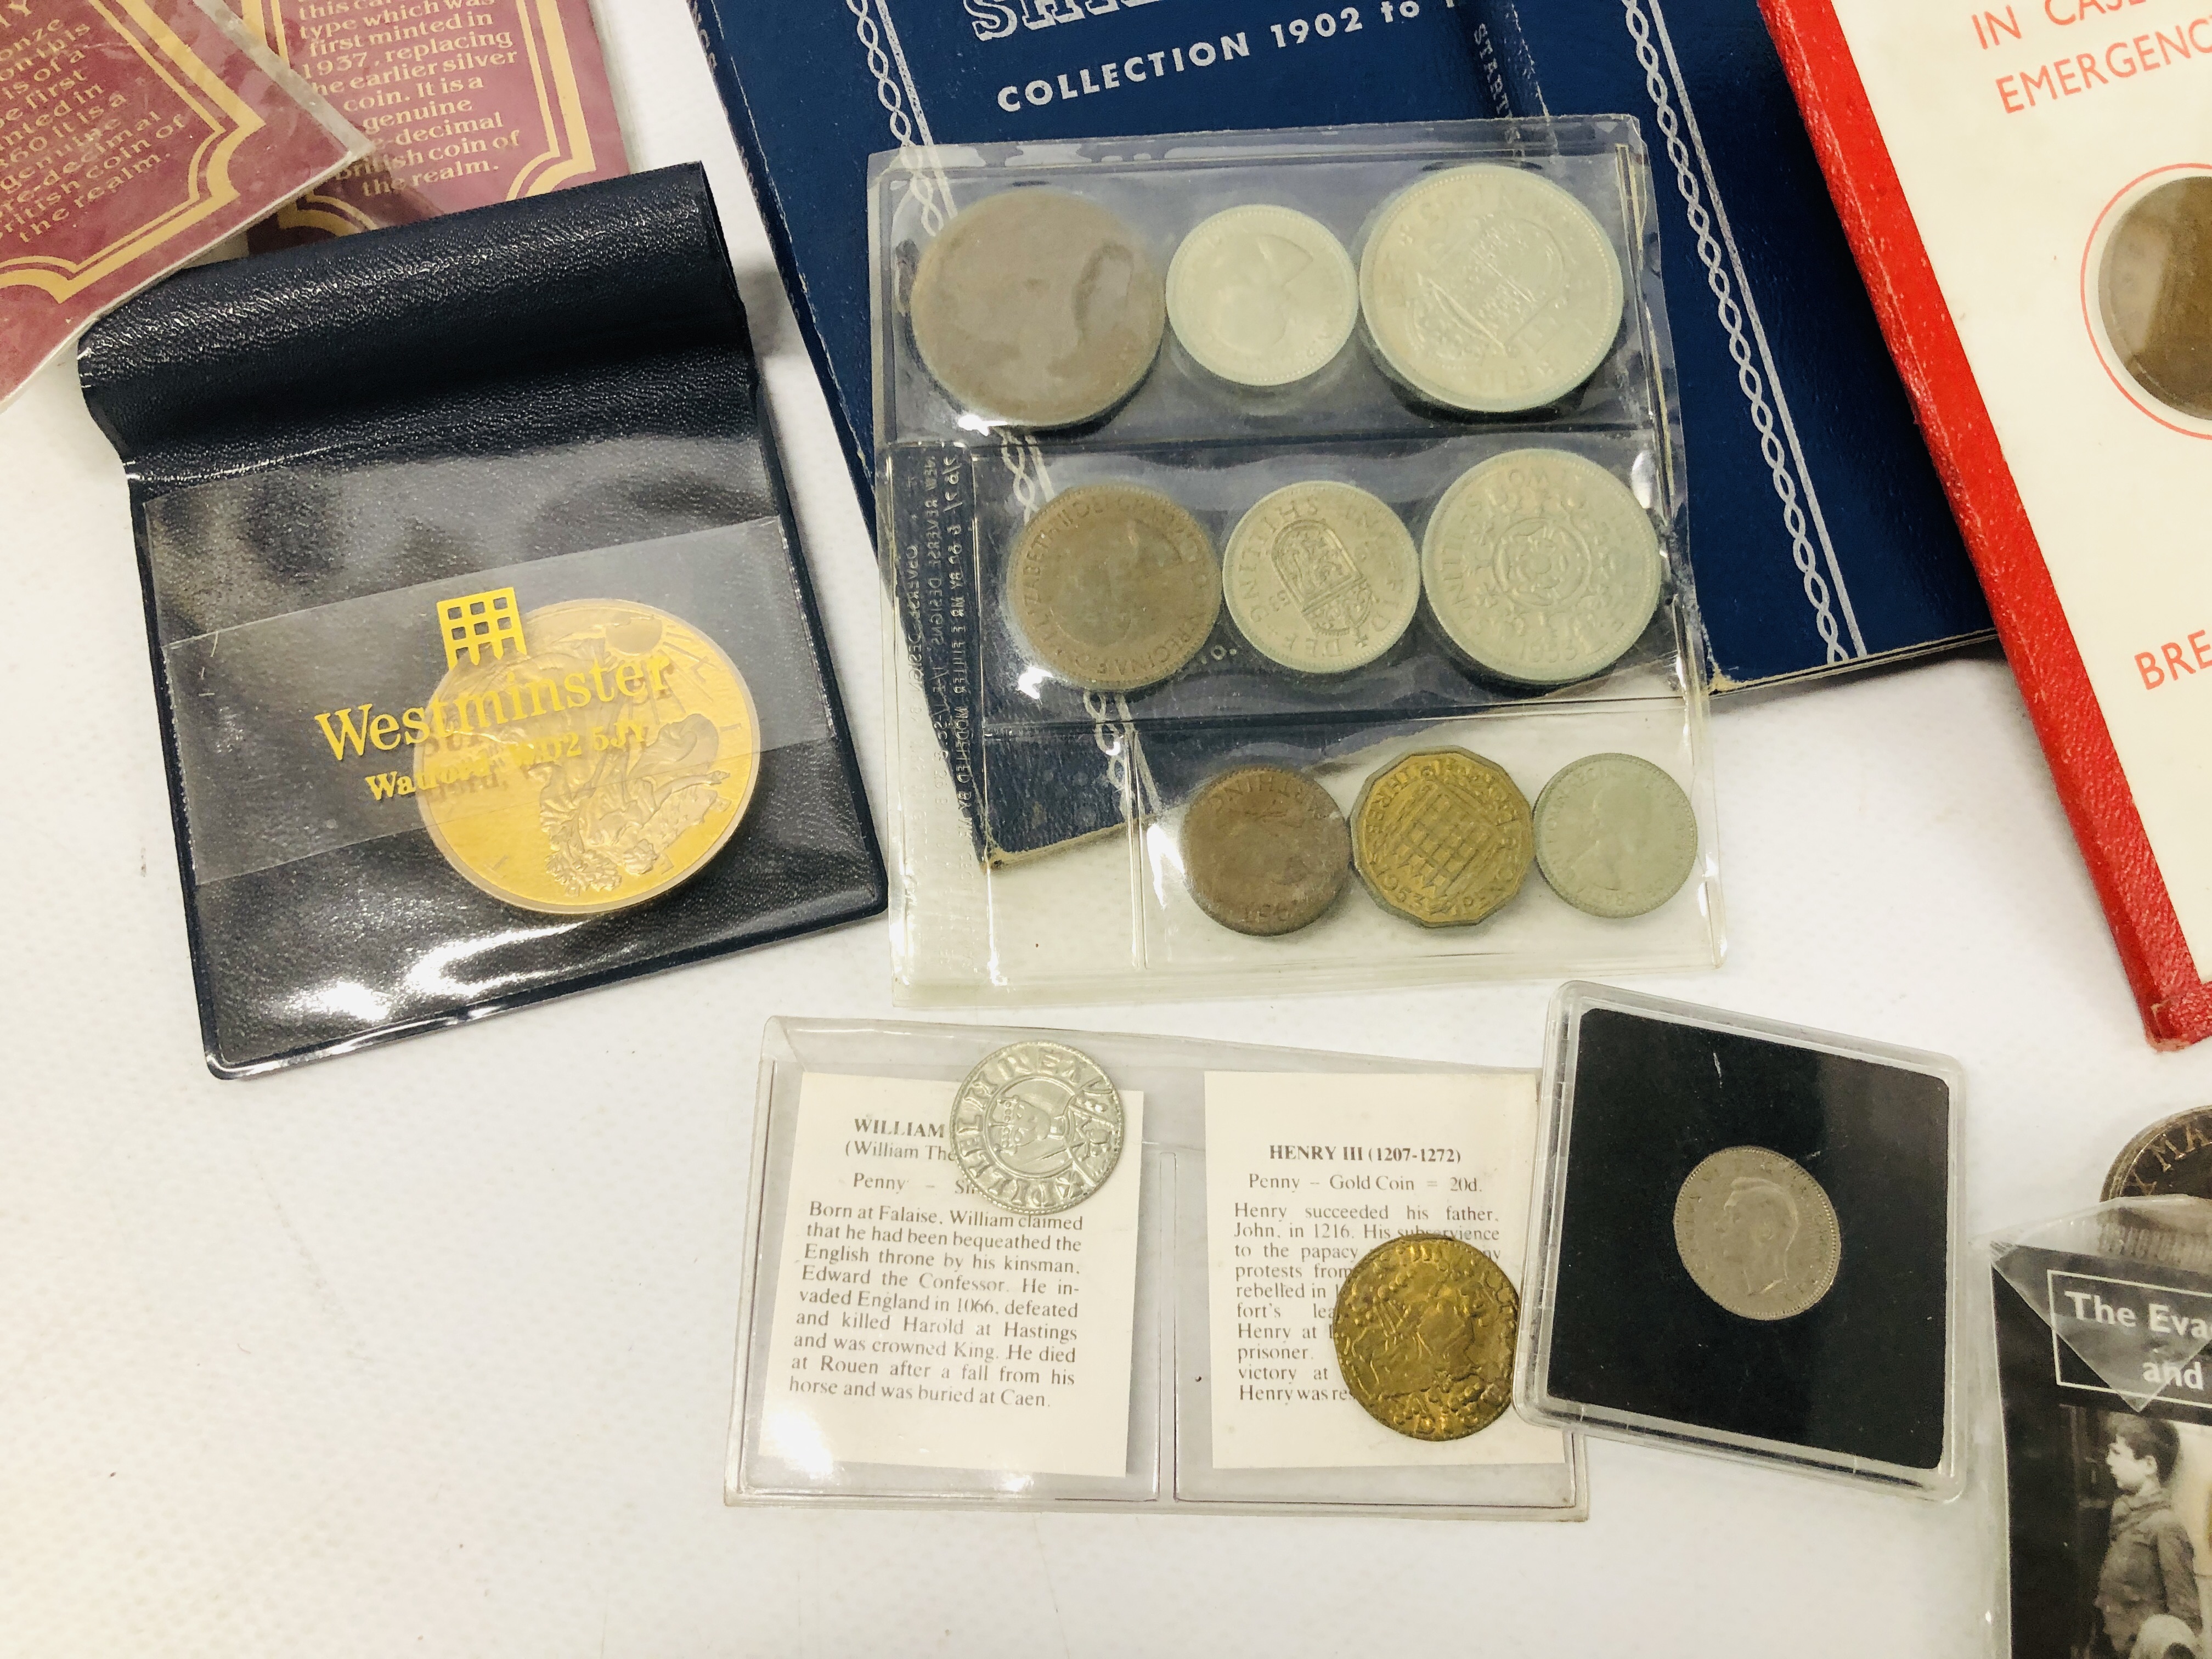 BASKET OF 24 WHITMAN COIN FOLDER ALONG WITH VARIOUS OTHER COINAGE SOME SET, ETC. - Image 2 of 16